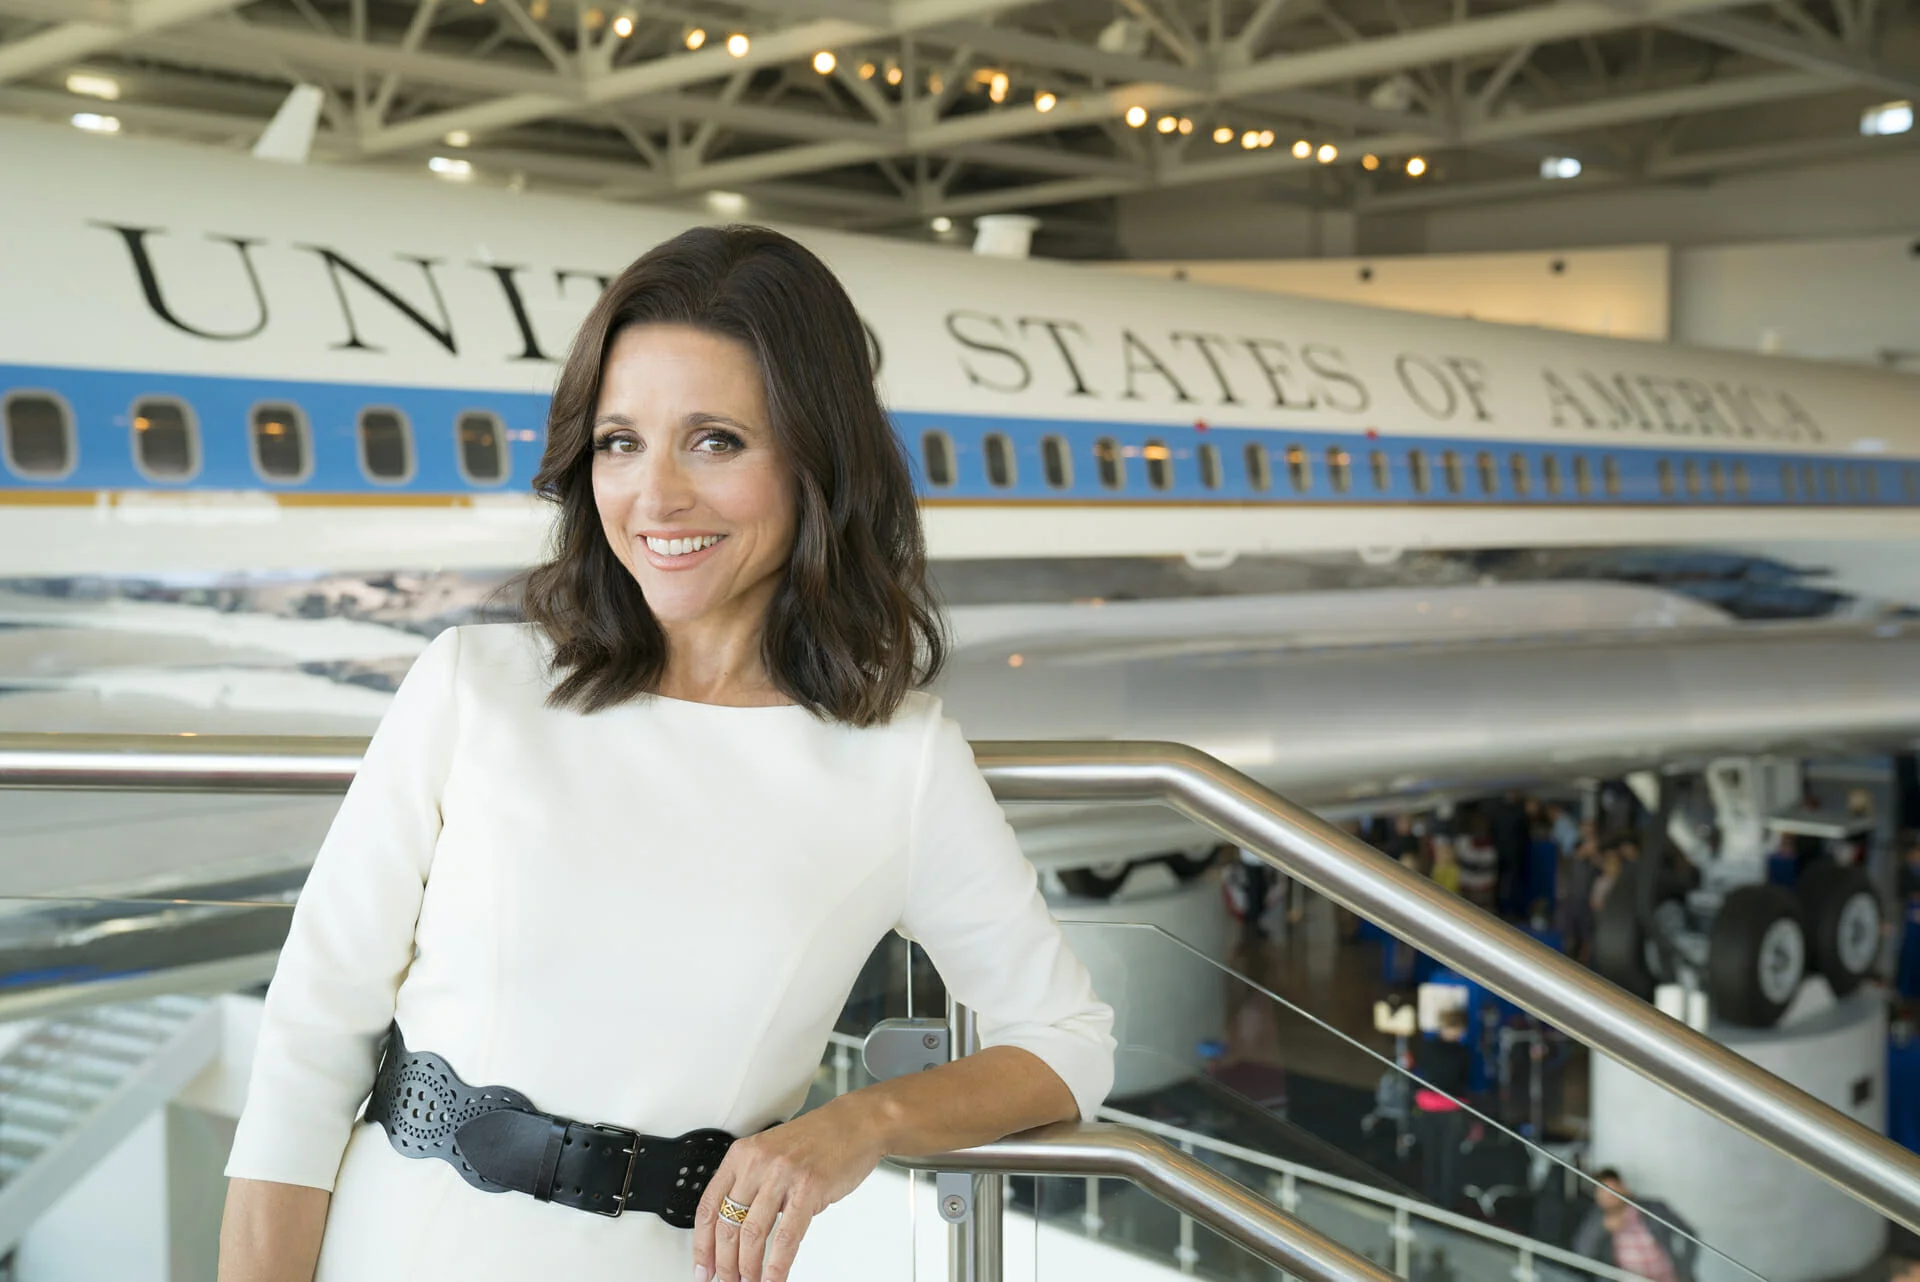 VEEP | A female vice-president? Not fiction anymore